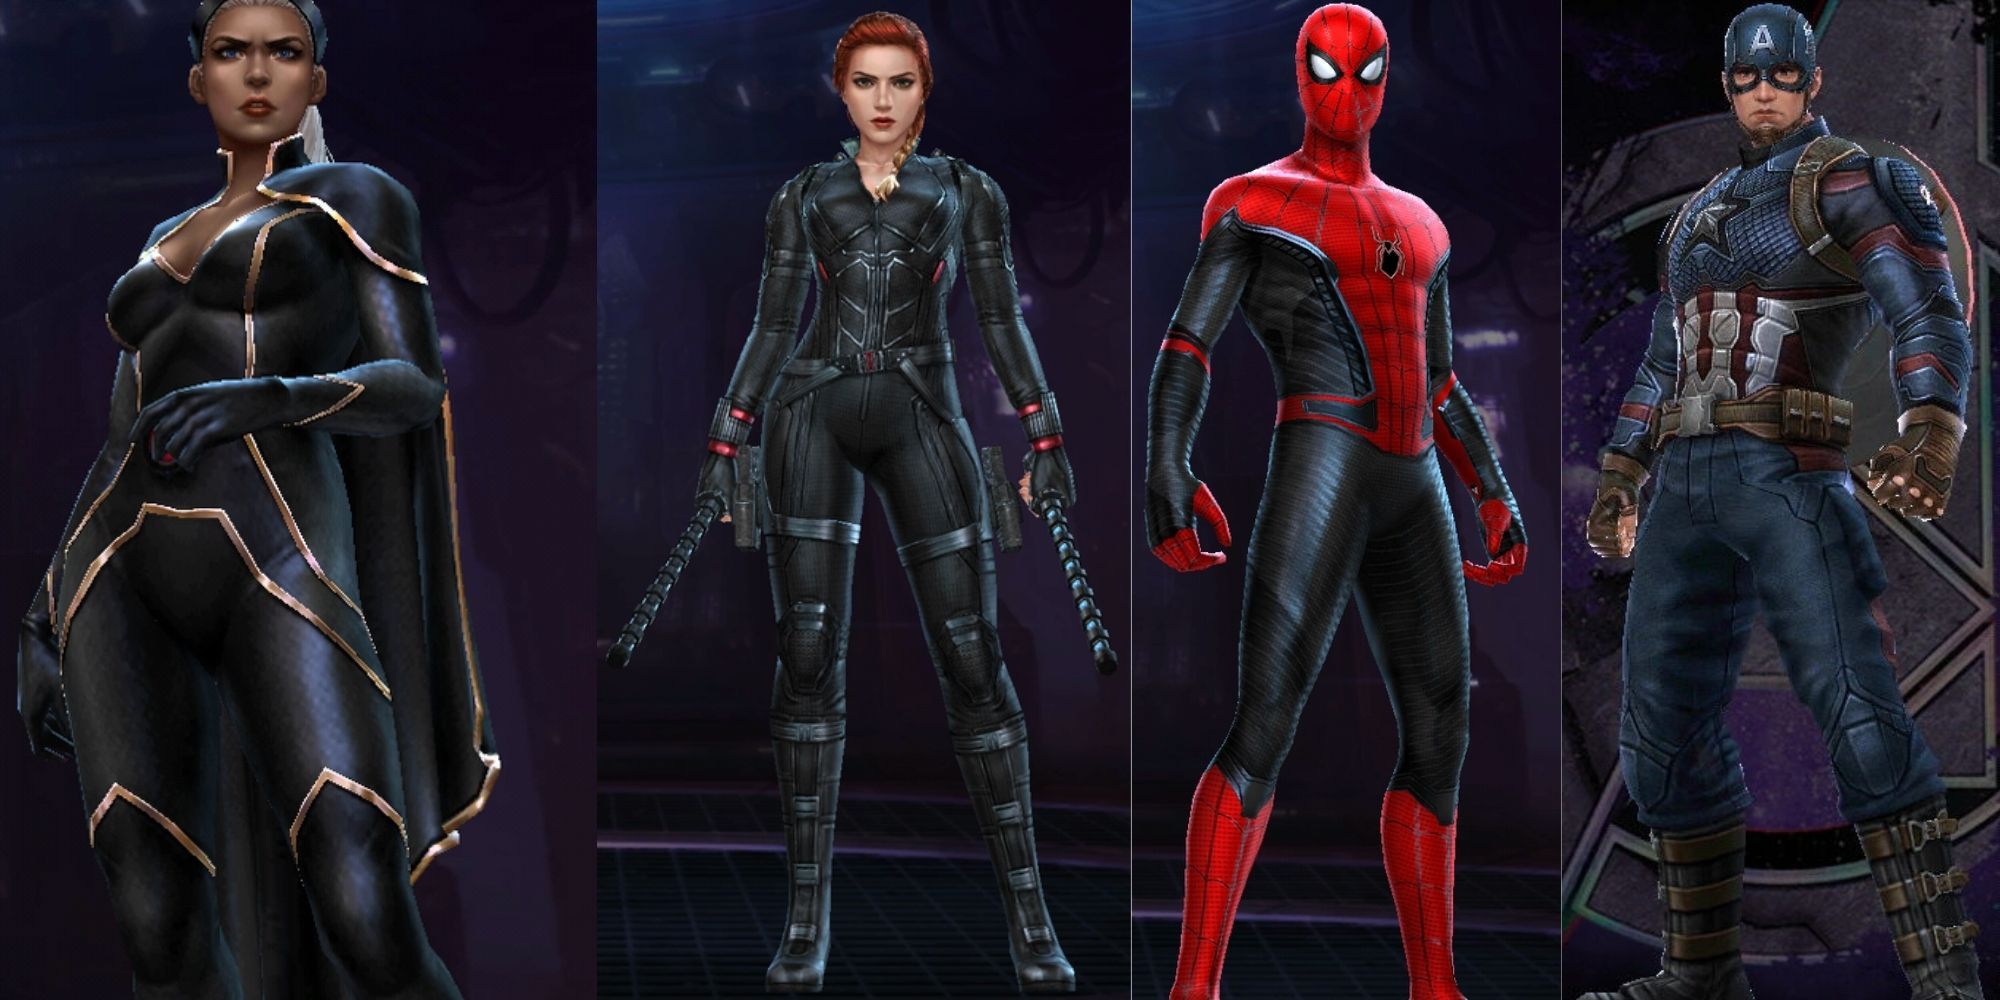 Split image of Storm, Black Widow, Spider-Man, and Captain America character models from Marvel Future Revolution.